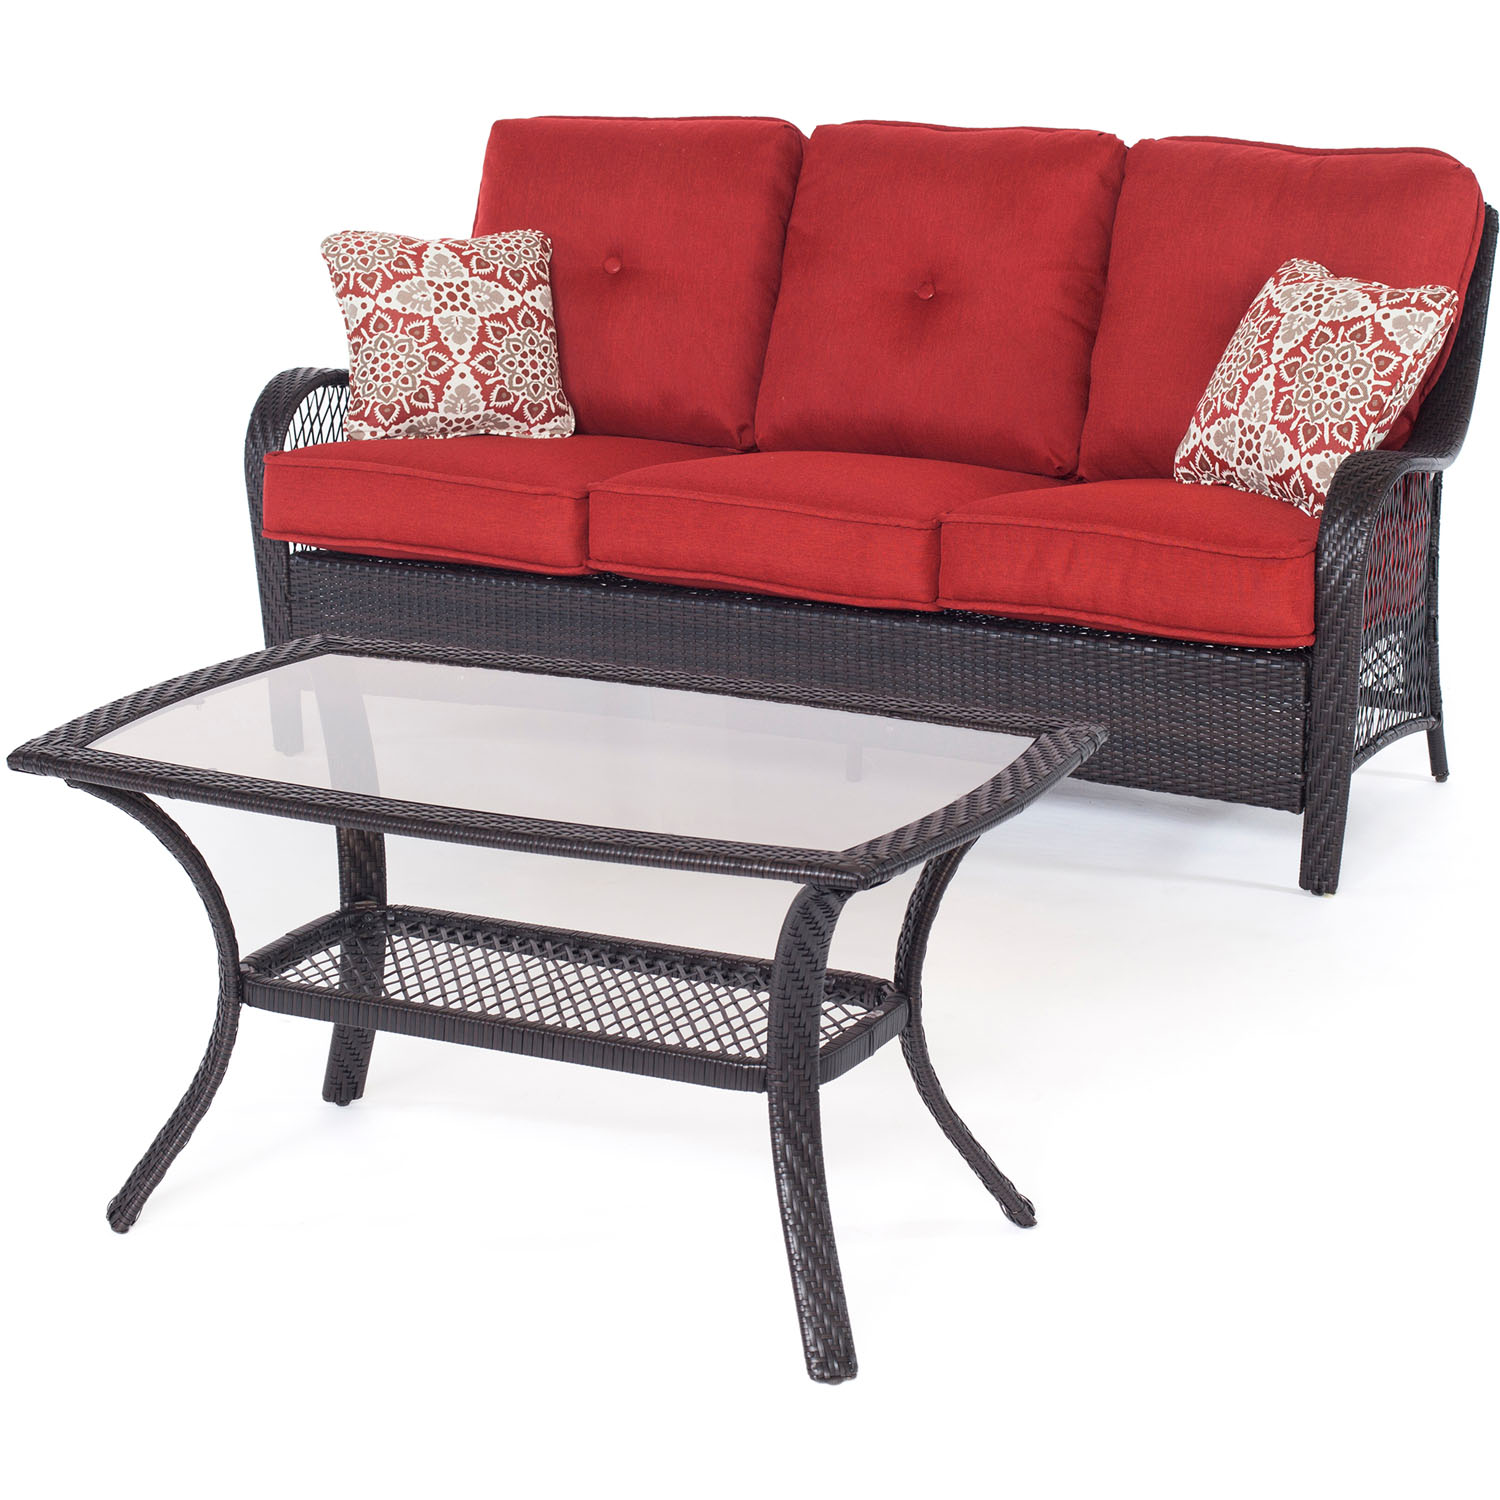 Hanover Orleans 2-Piece Wicker and Steel Outdoor Patio Sofa Set, Autumn Berry - image 1 of 5